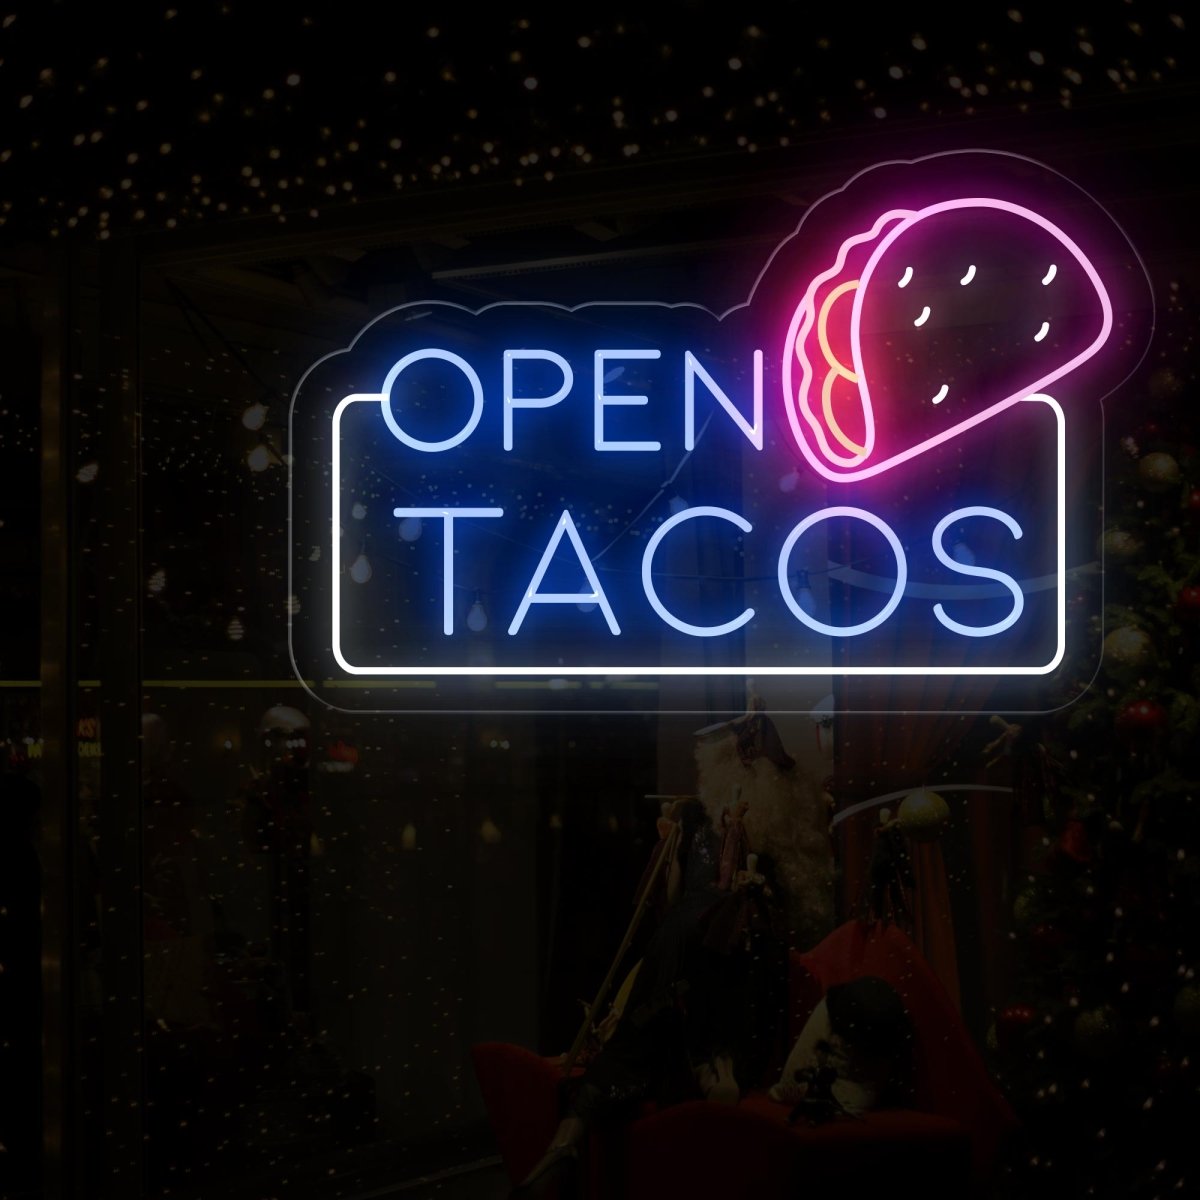 Open Tacos Neon Sign | Irresistible Illumination for Your Taco Spot - NEONXPERT